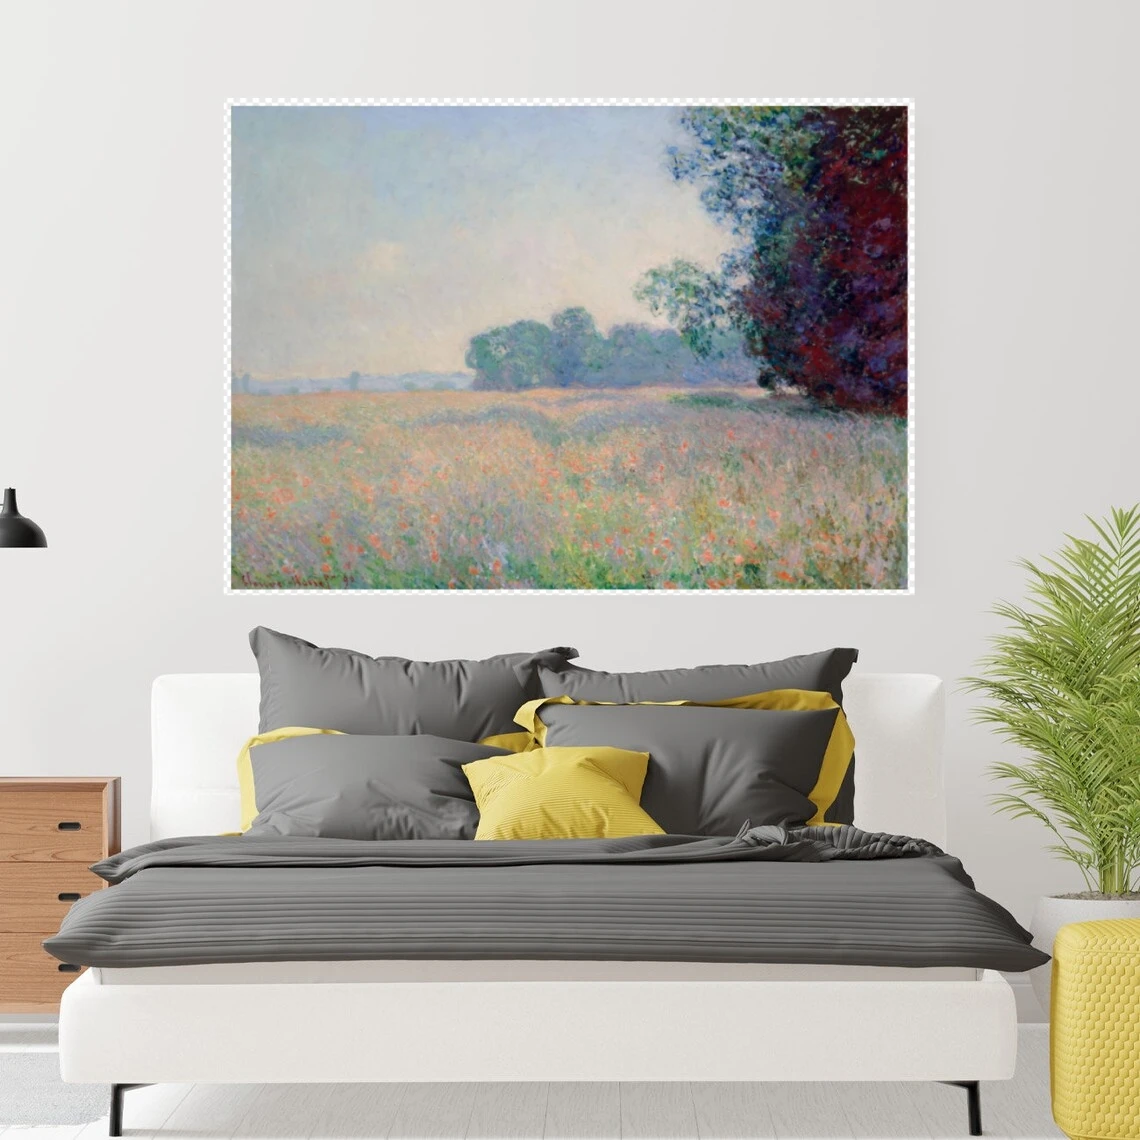 Champ d'avoine Oat Field by Claude Monet Oil on Canvas Painting Reproduction Hand Painted No Framed Home Decor Art Craft